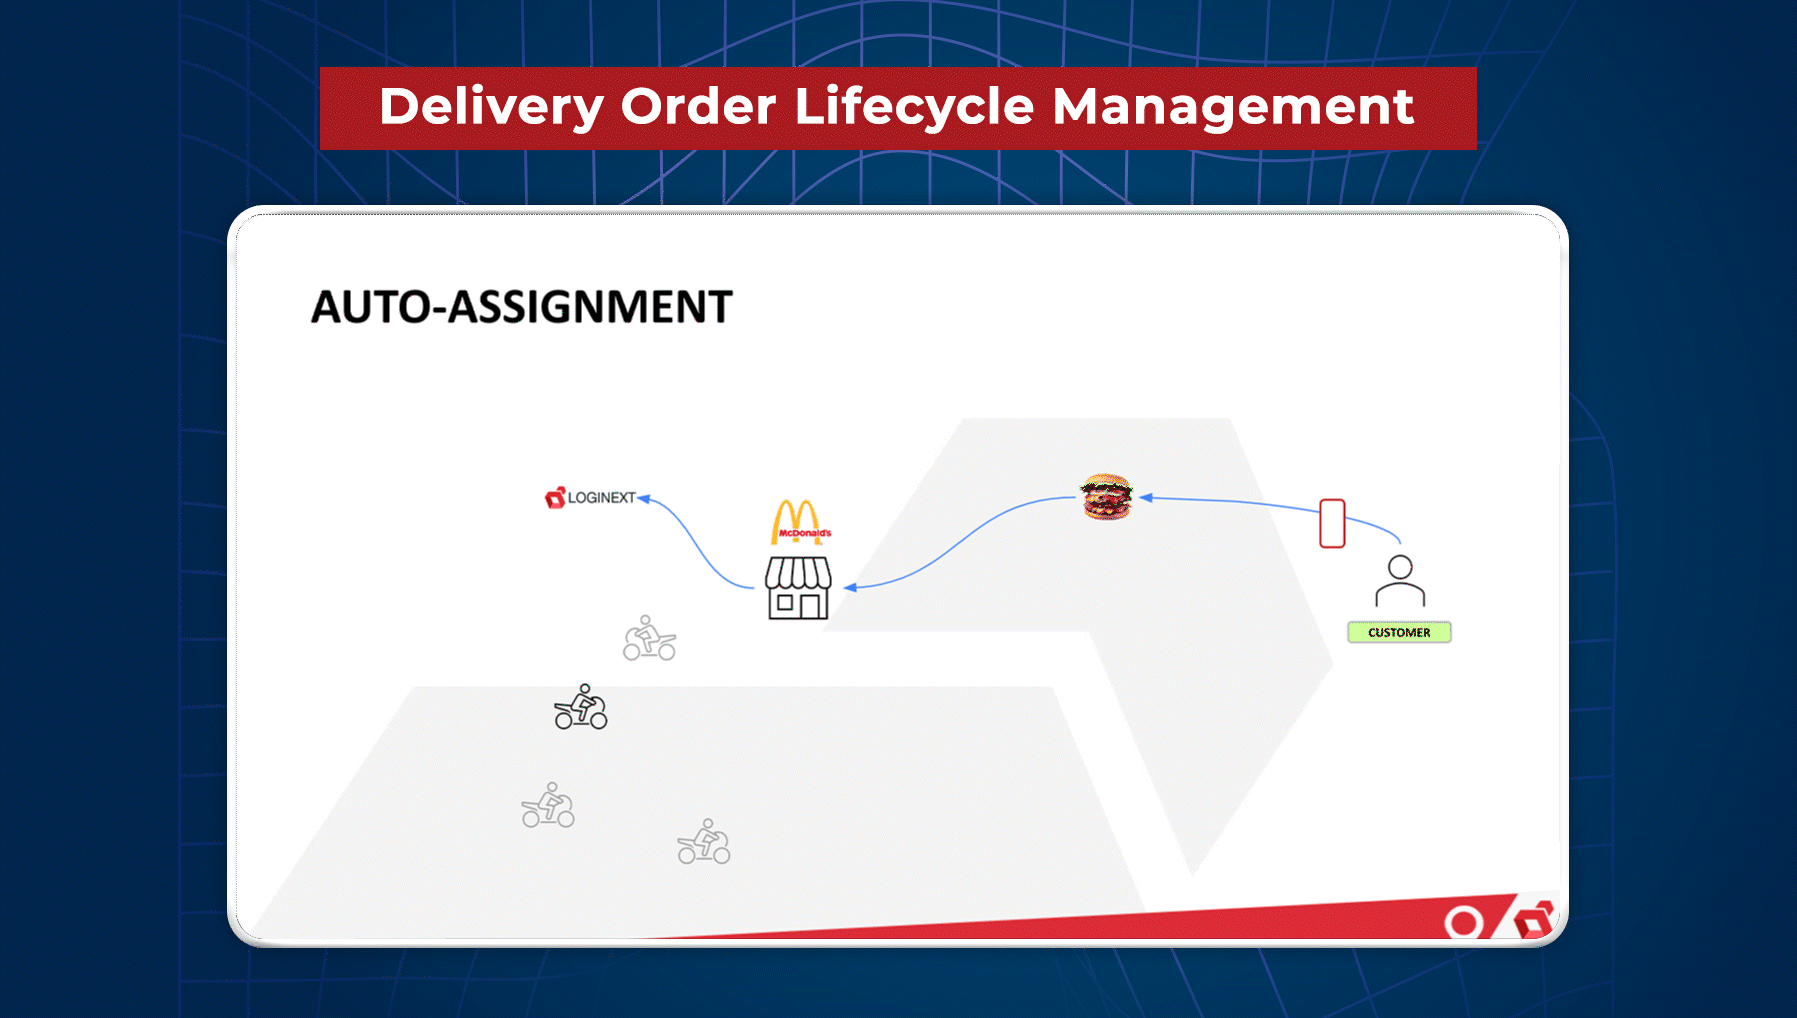 Delivery Order Lifecycle Management Software Solution